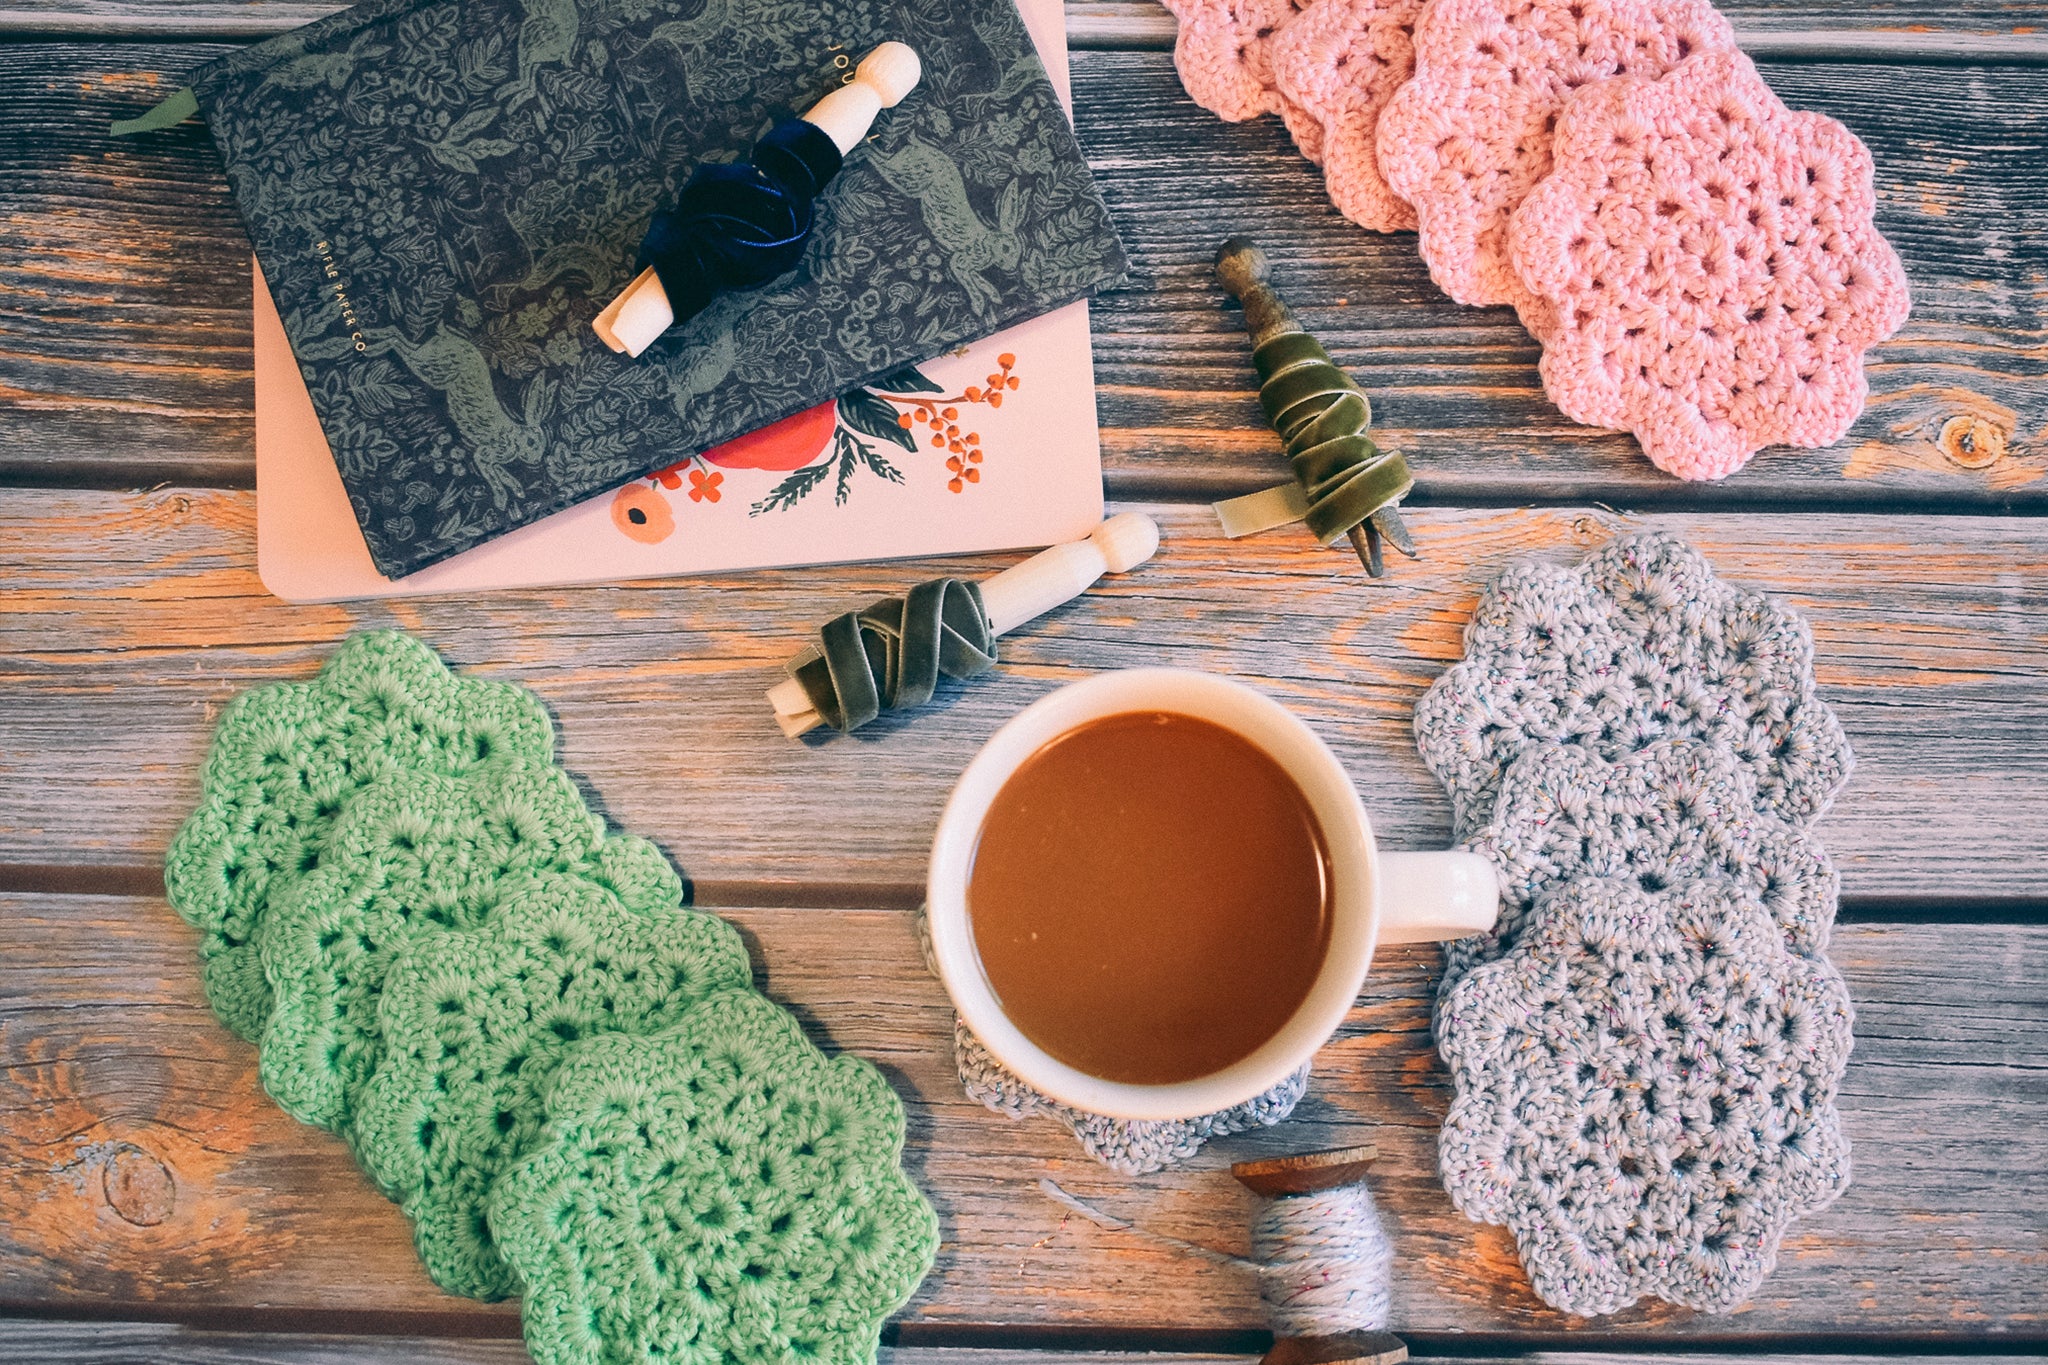 Critter Crafting - Silver Crochet Coasters & Cottagecore Home Accents